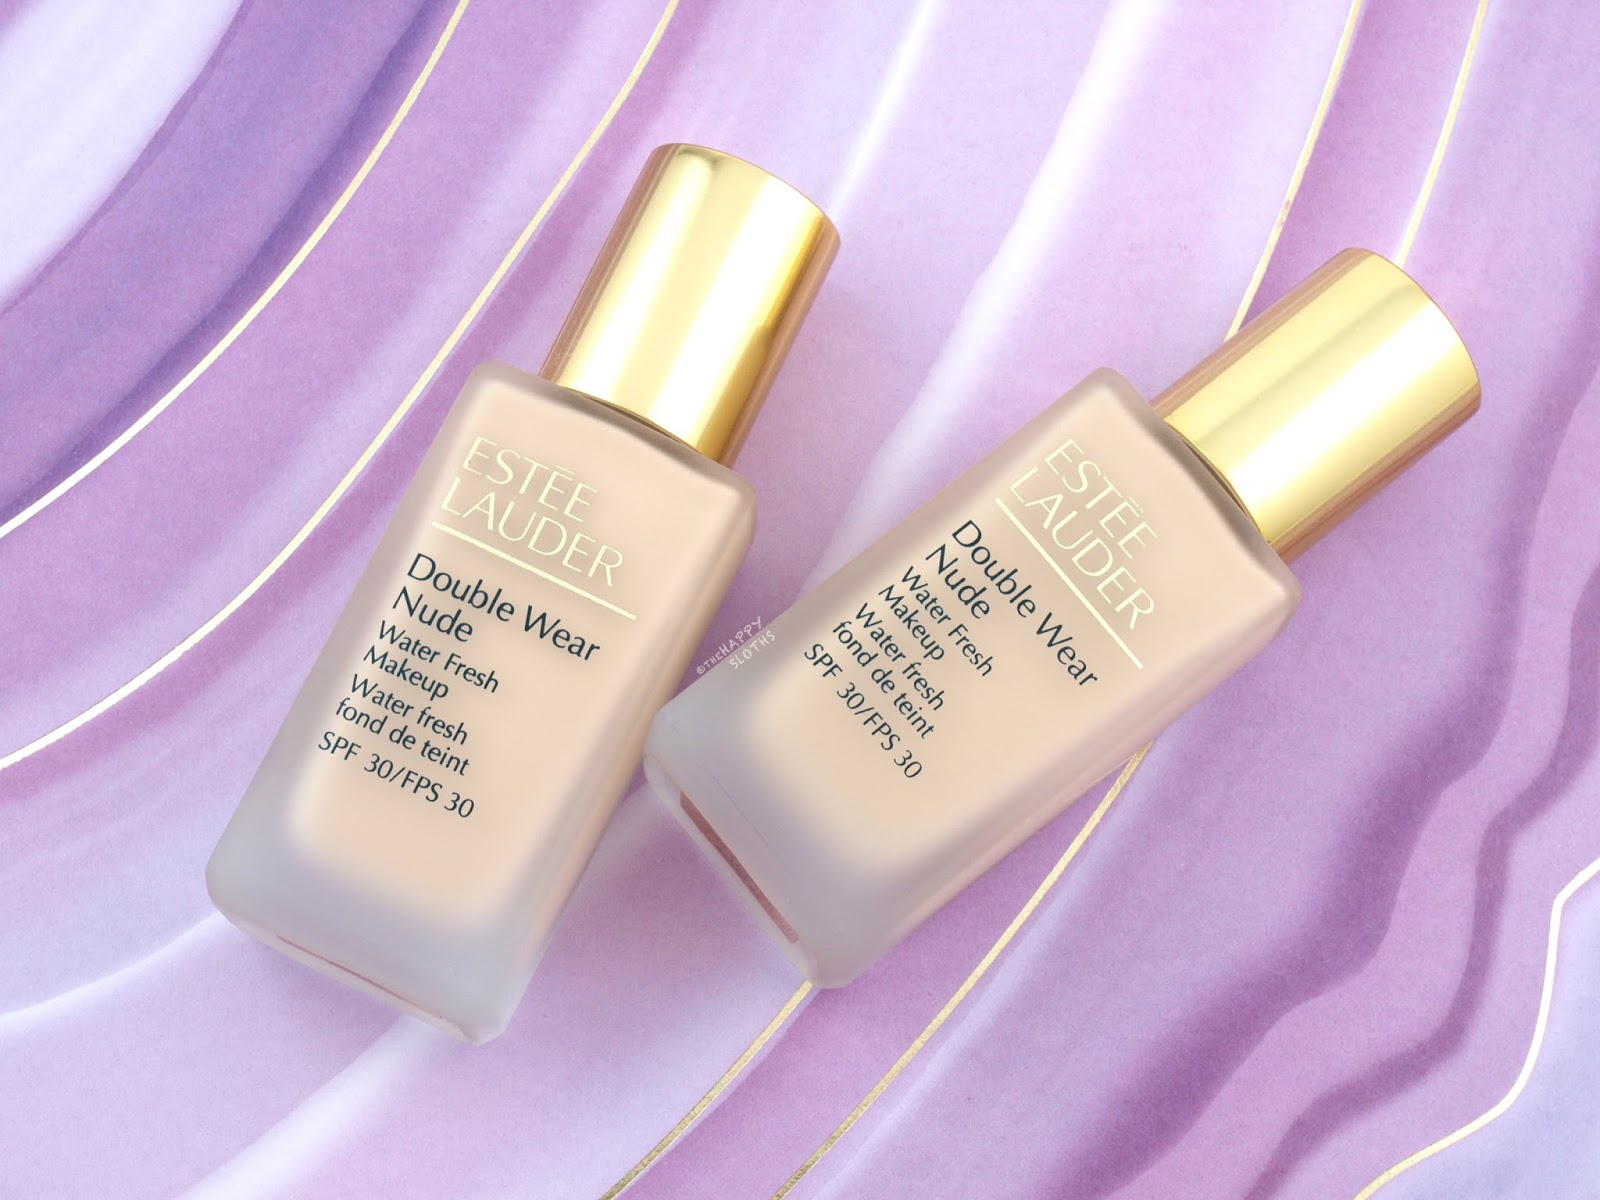 Estee Lauder Double Wear Nude Water Fresh Makeup: Review and Swatches